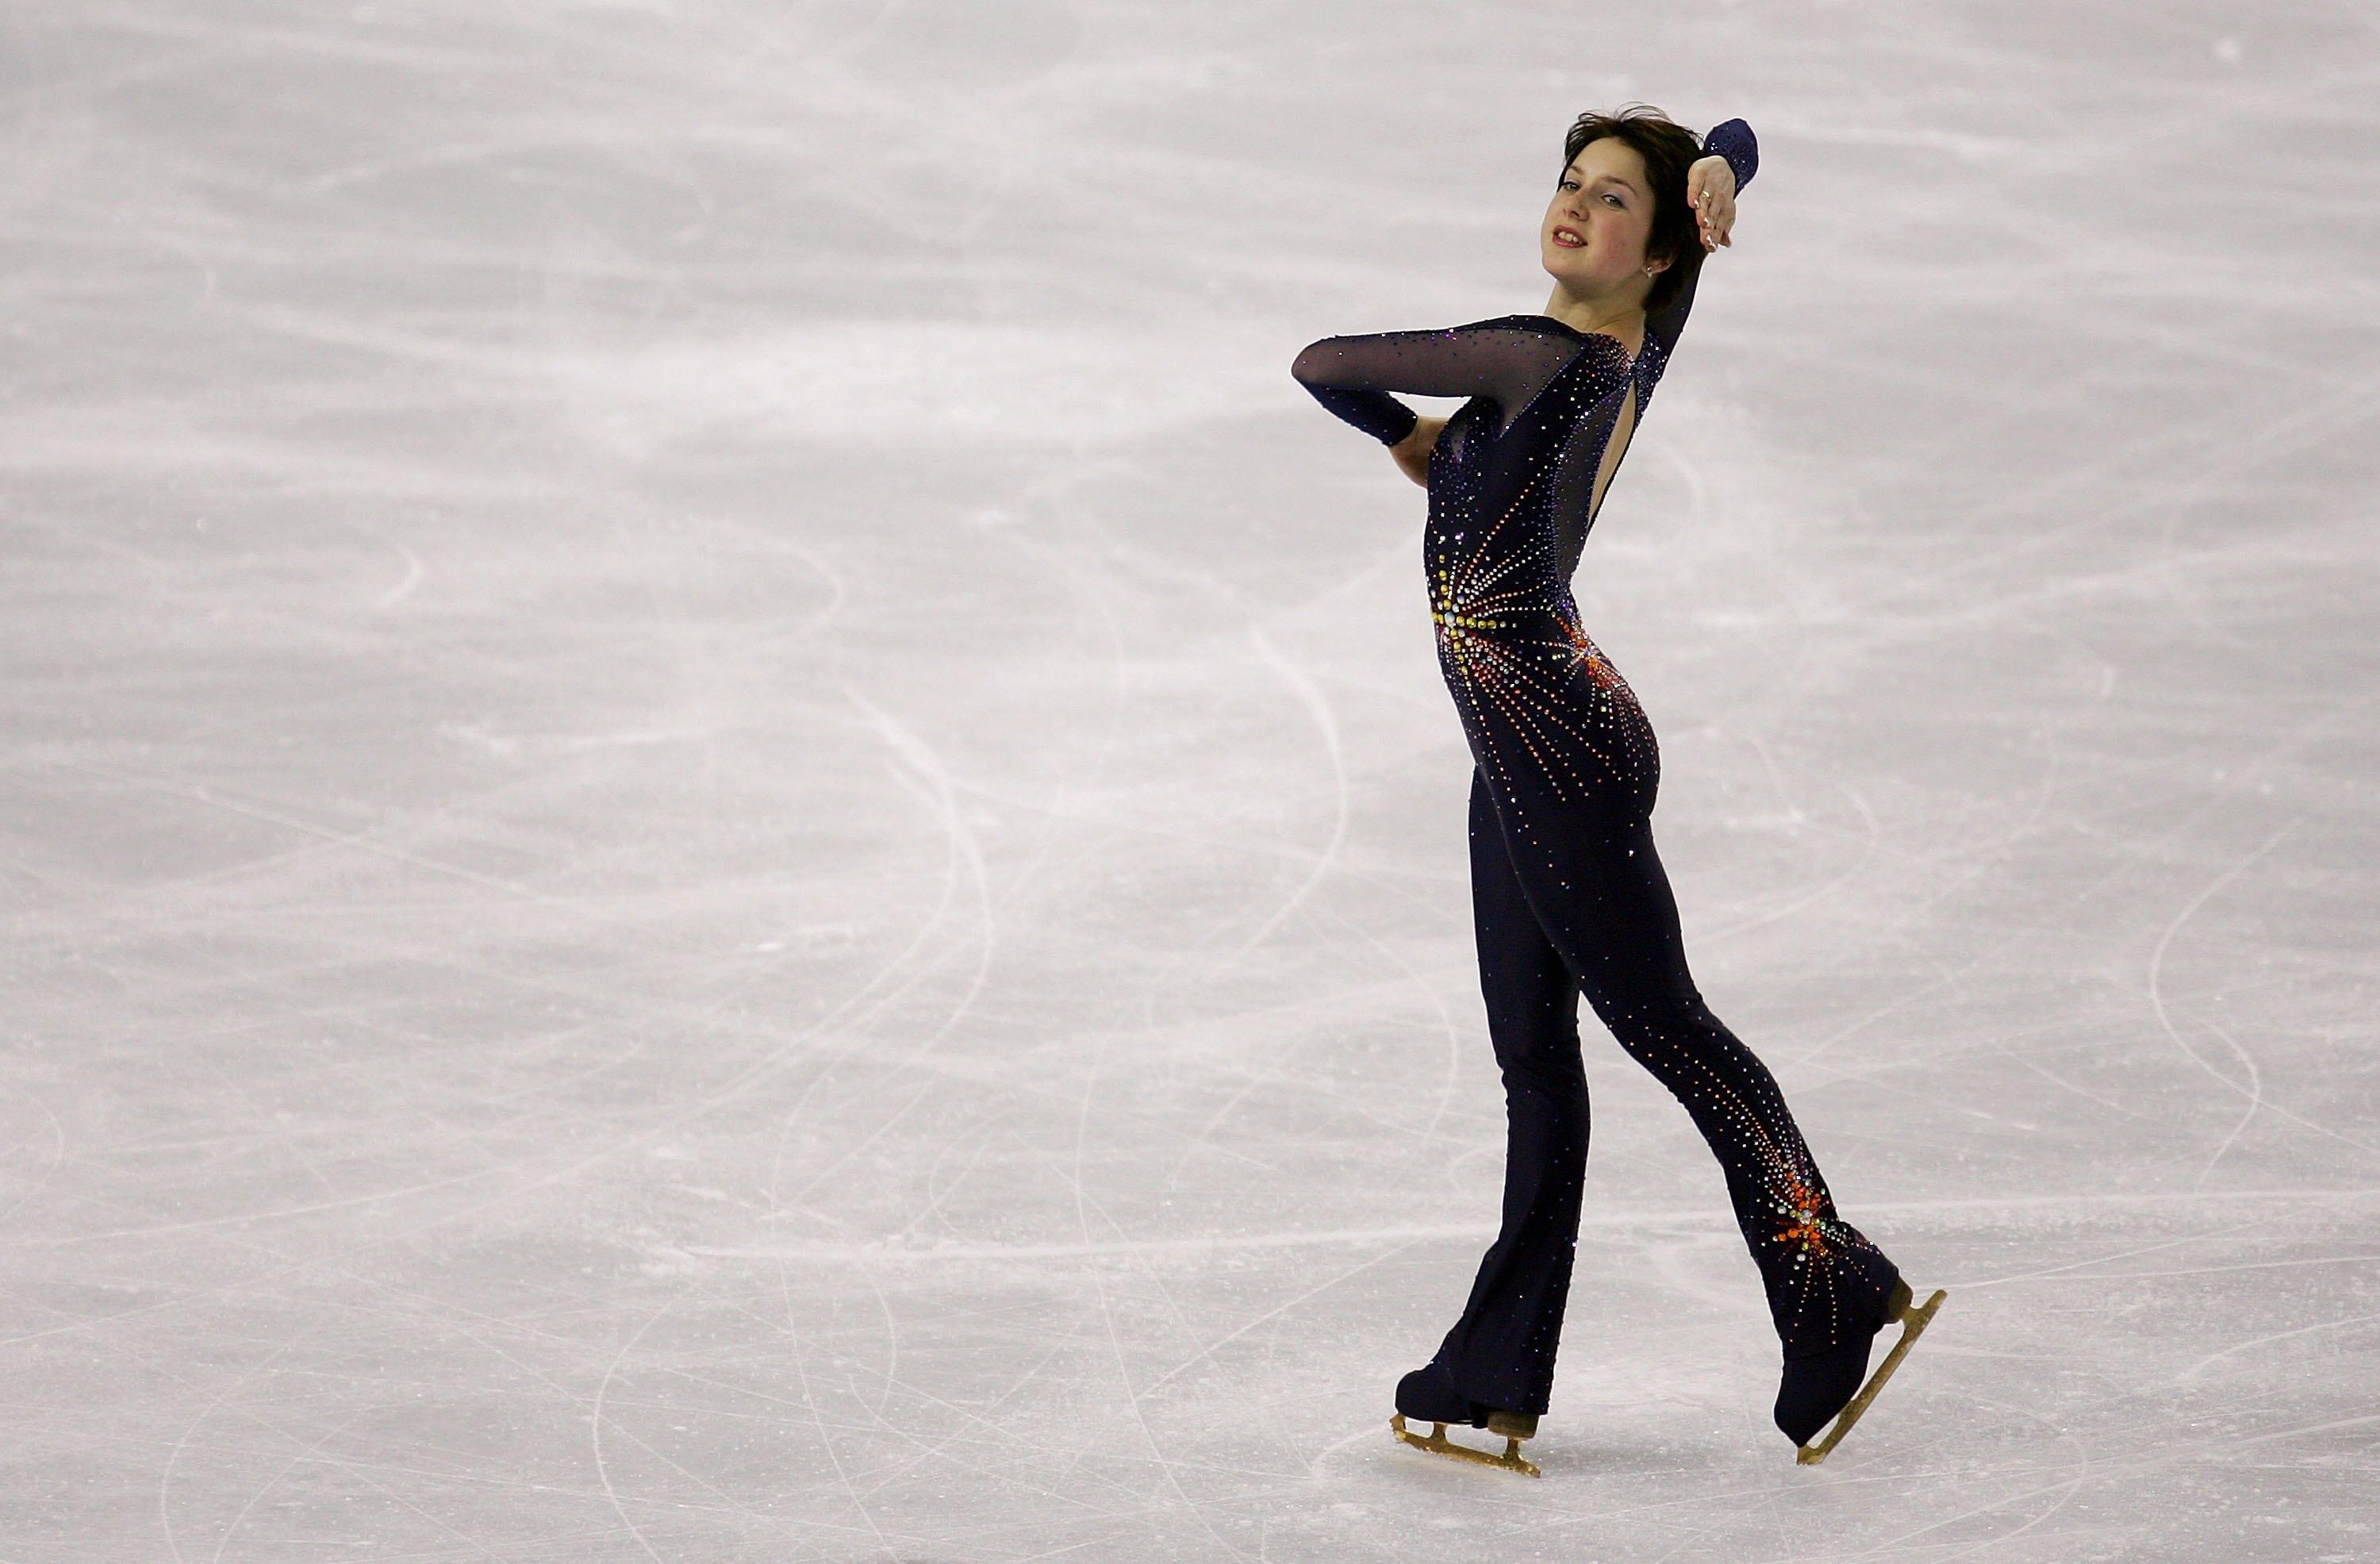 This French figure skater may not have won a medal, but her pants ...